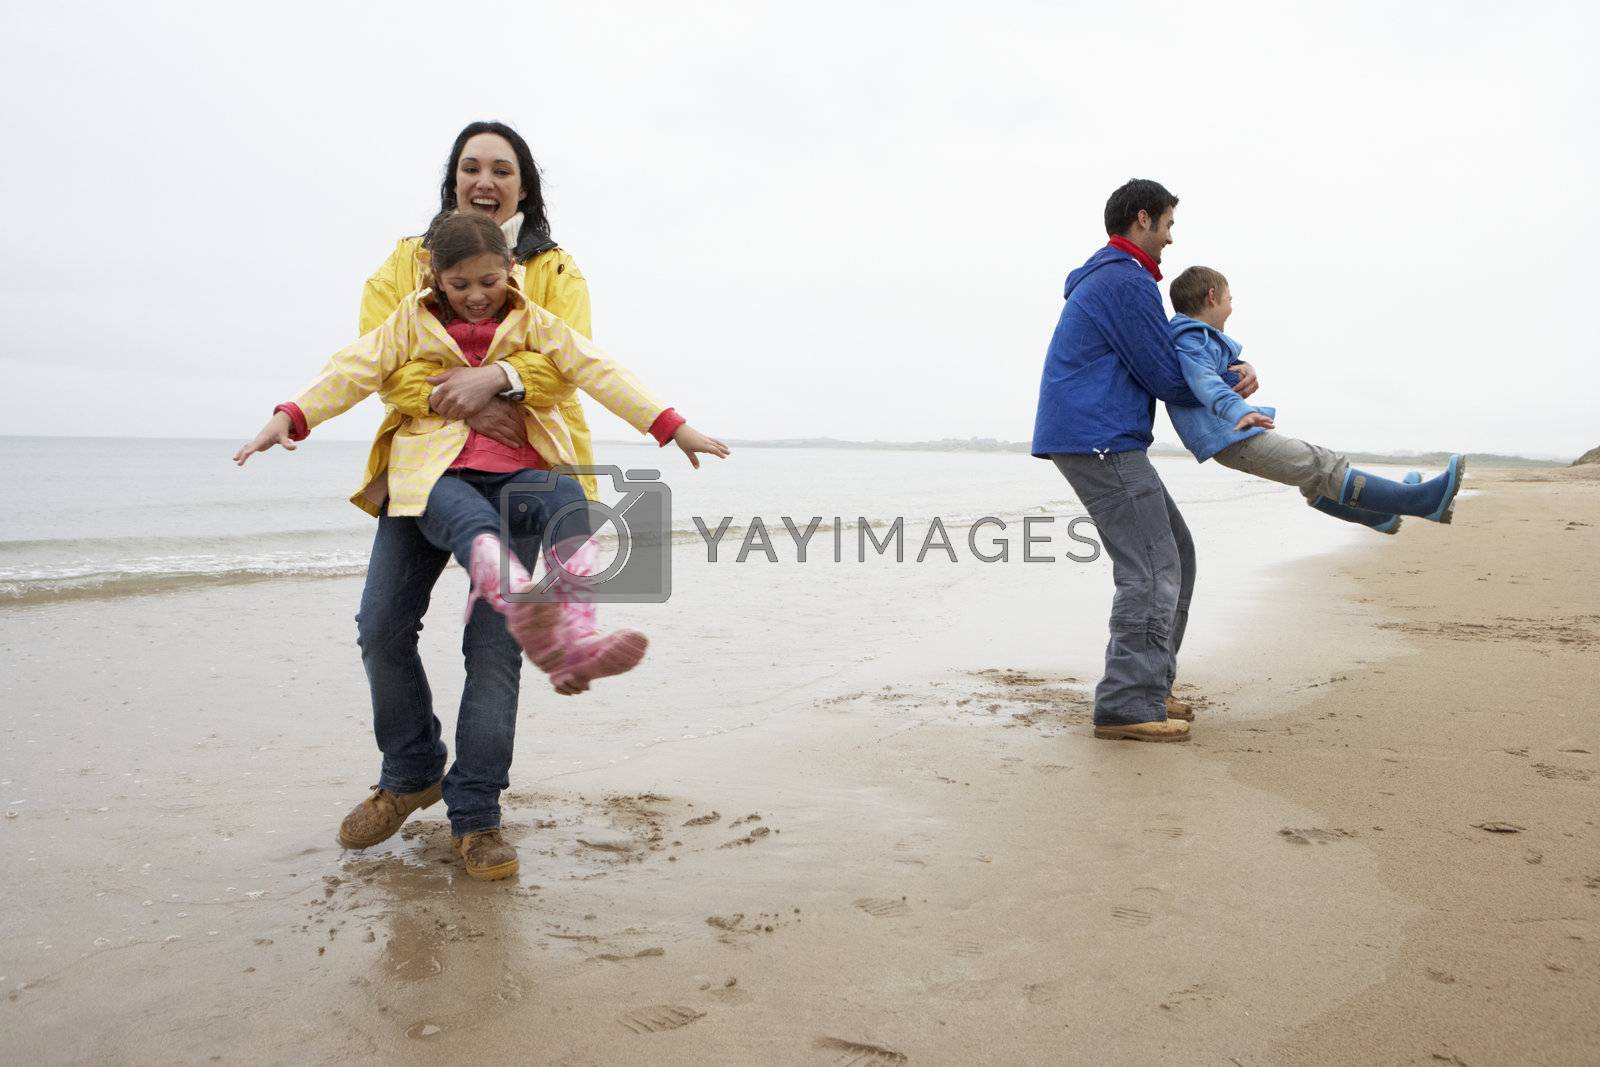 Royalty free image of Family playing on beach by omg_images